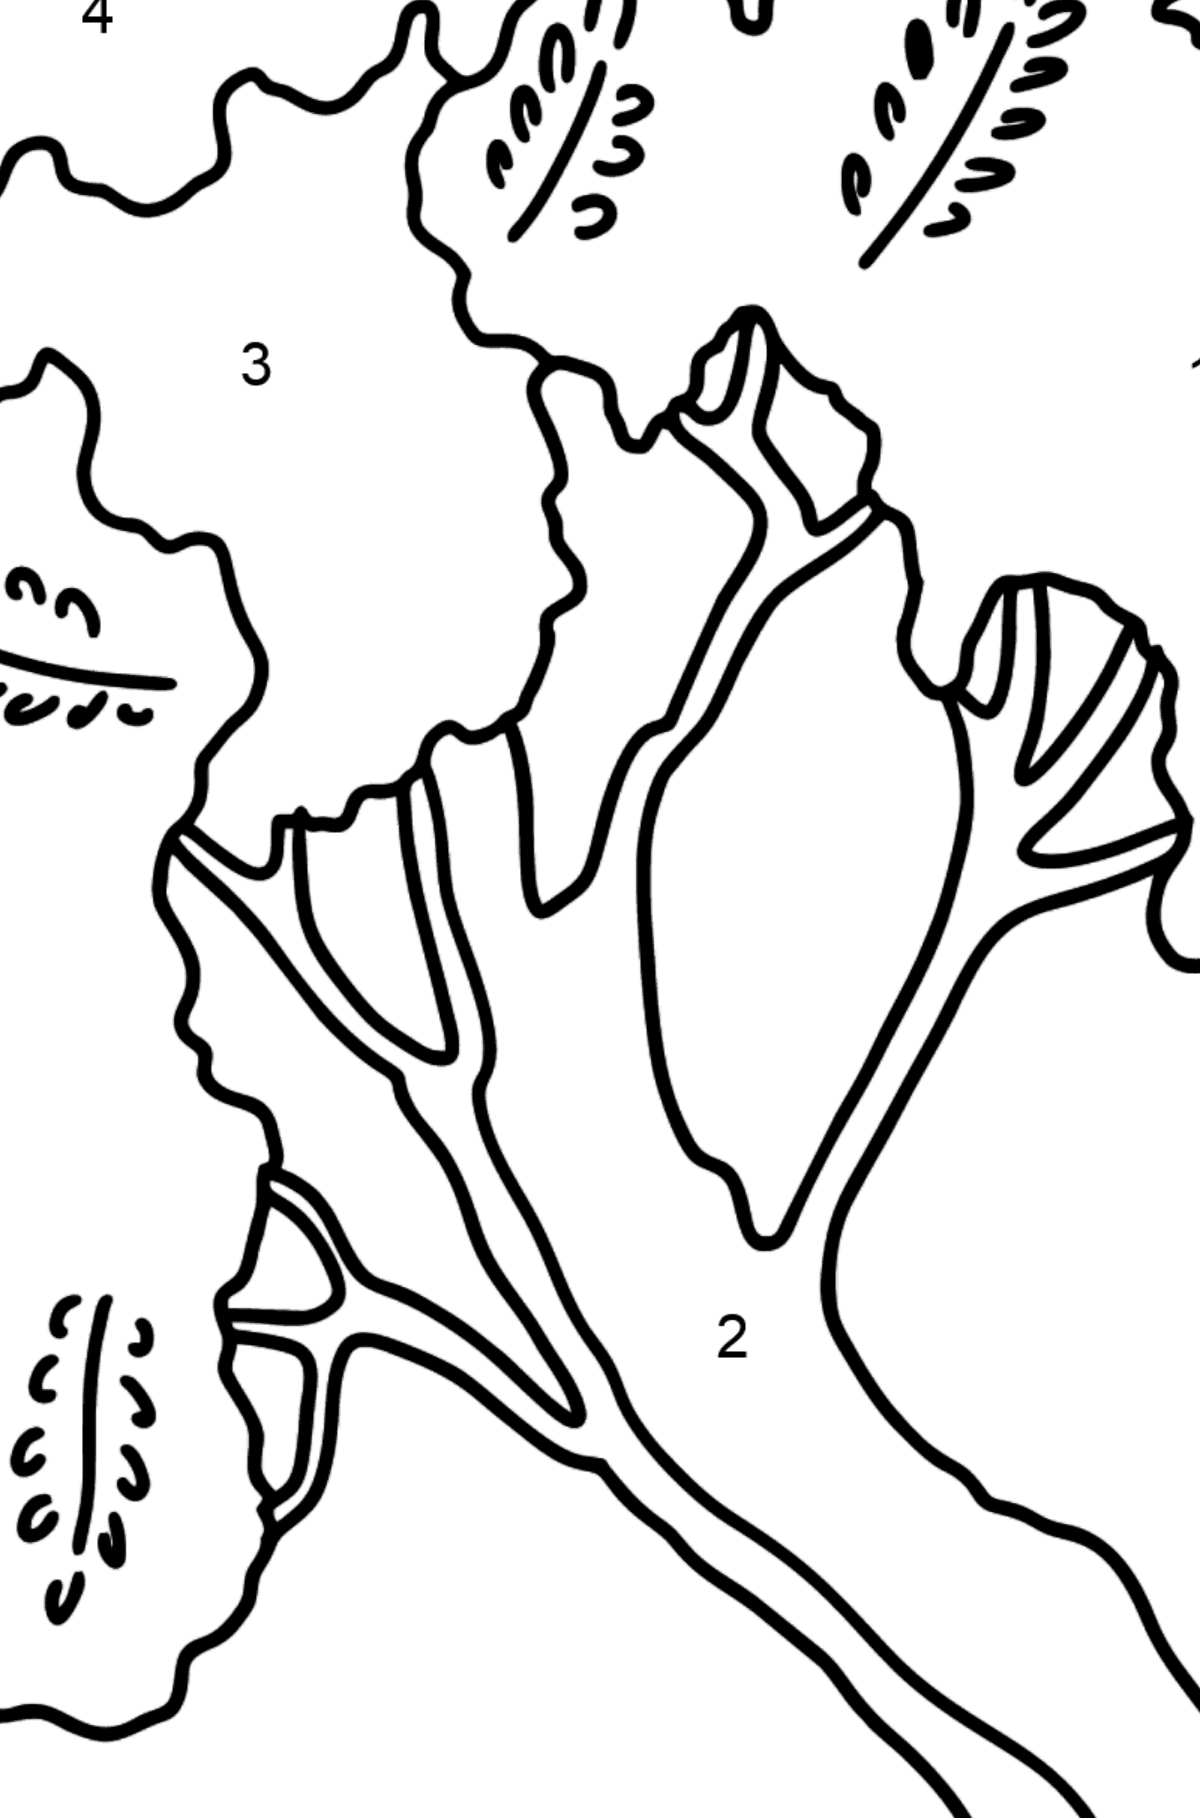 Acacia coloring page - Coloring by Numbers for Kids